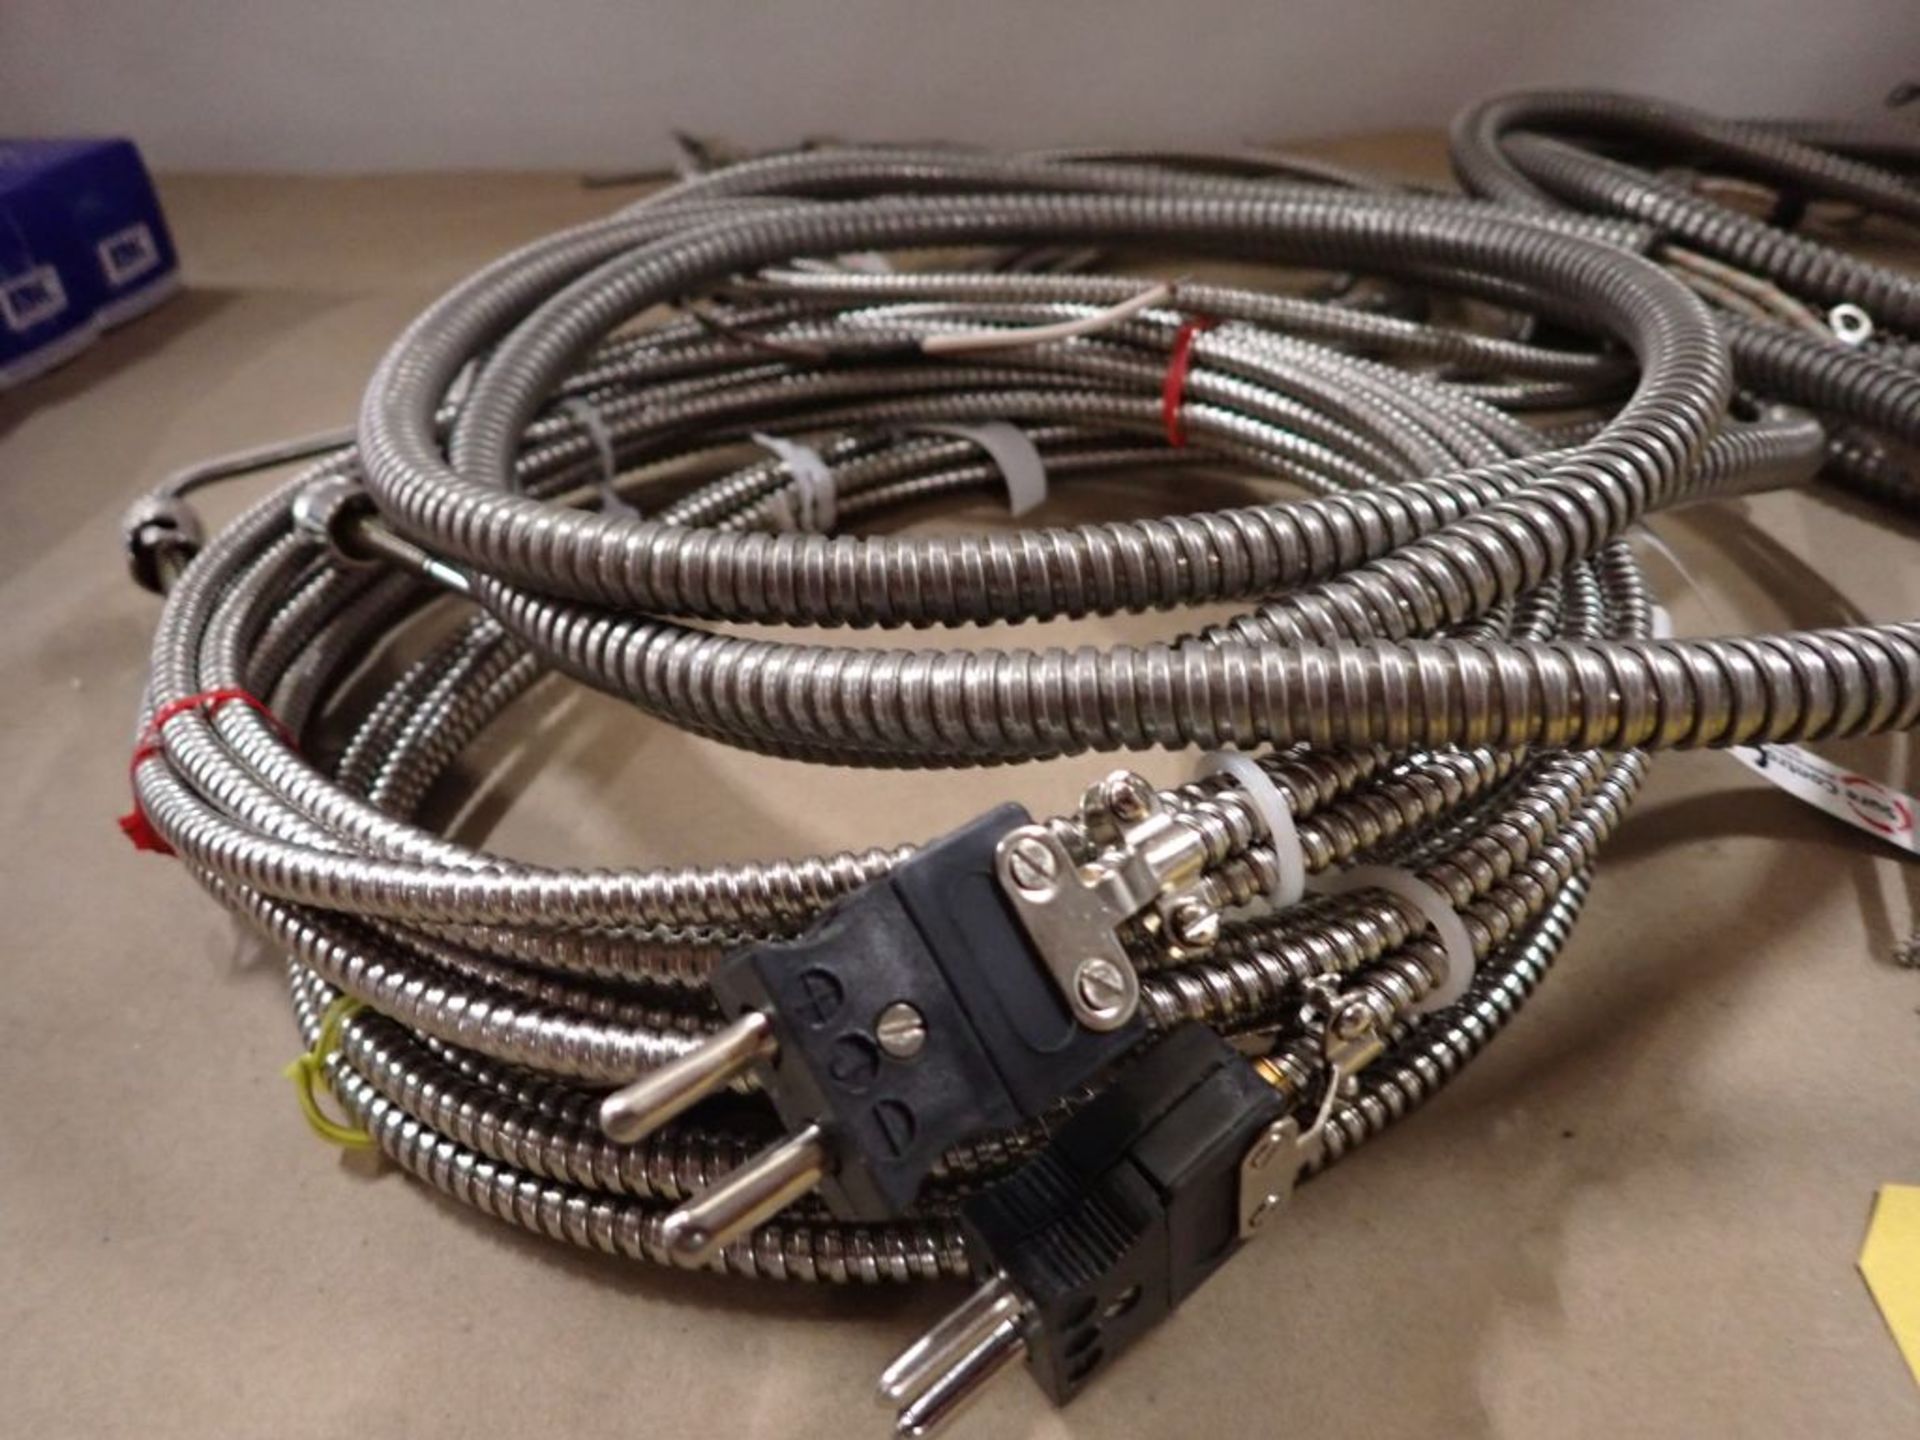 Lot of (7) Sure Controls Inc. Theromocouple Cable with Connectors - Image 2 of 3